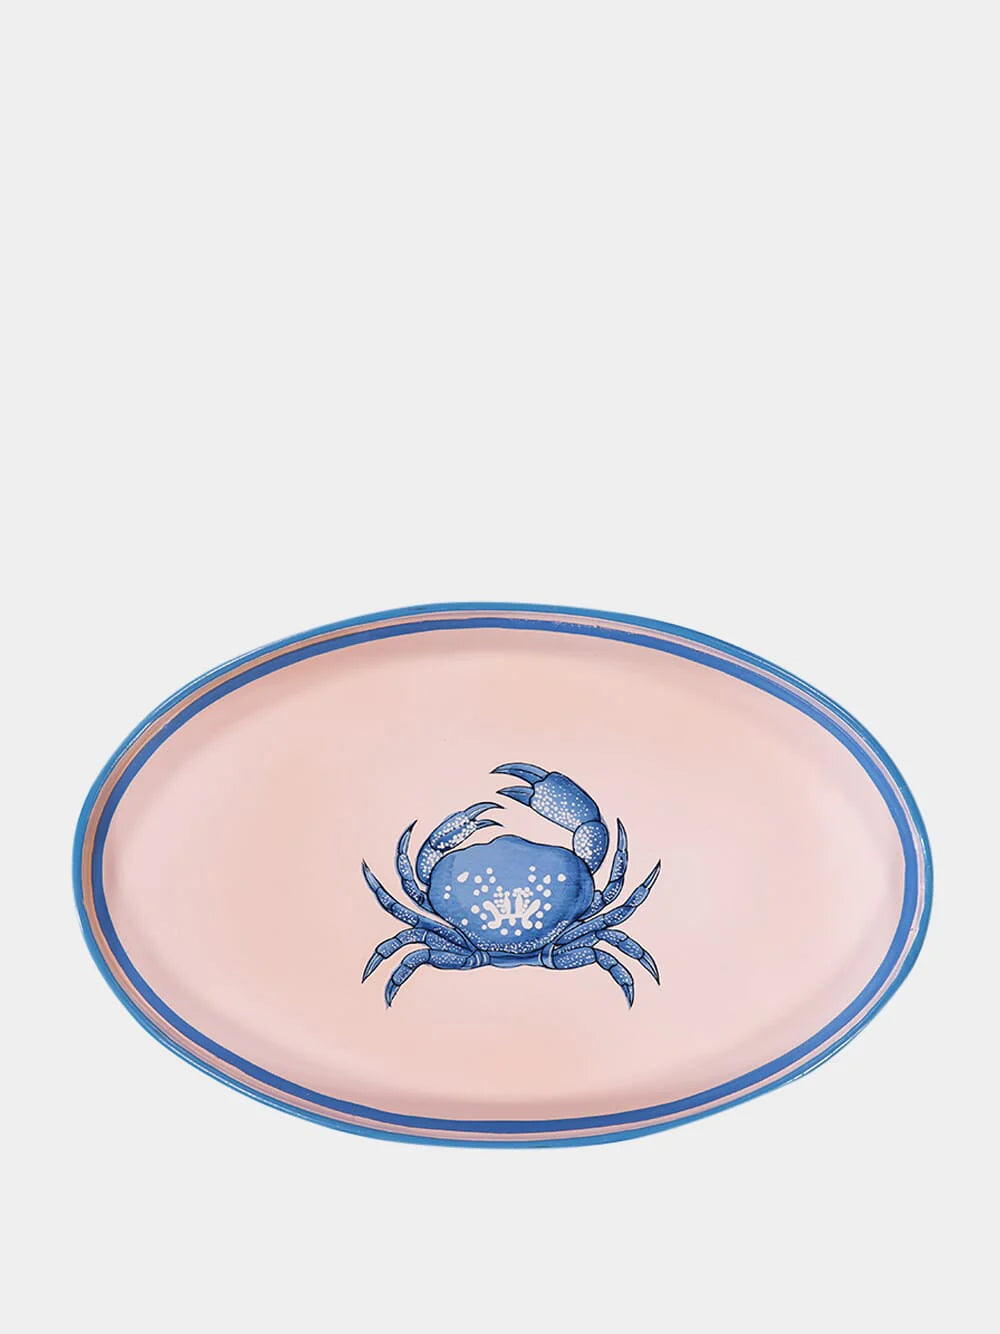 An oval shaped iron tray that features a hand-painted illustration of blue crab on a pink background. 